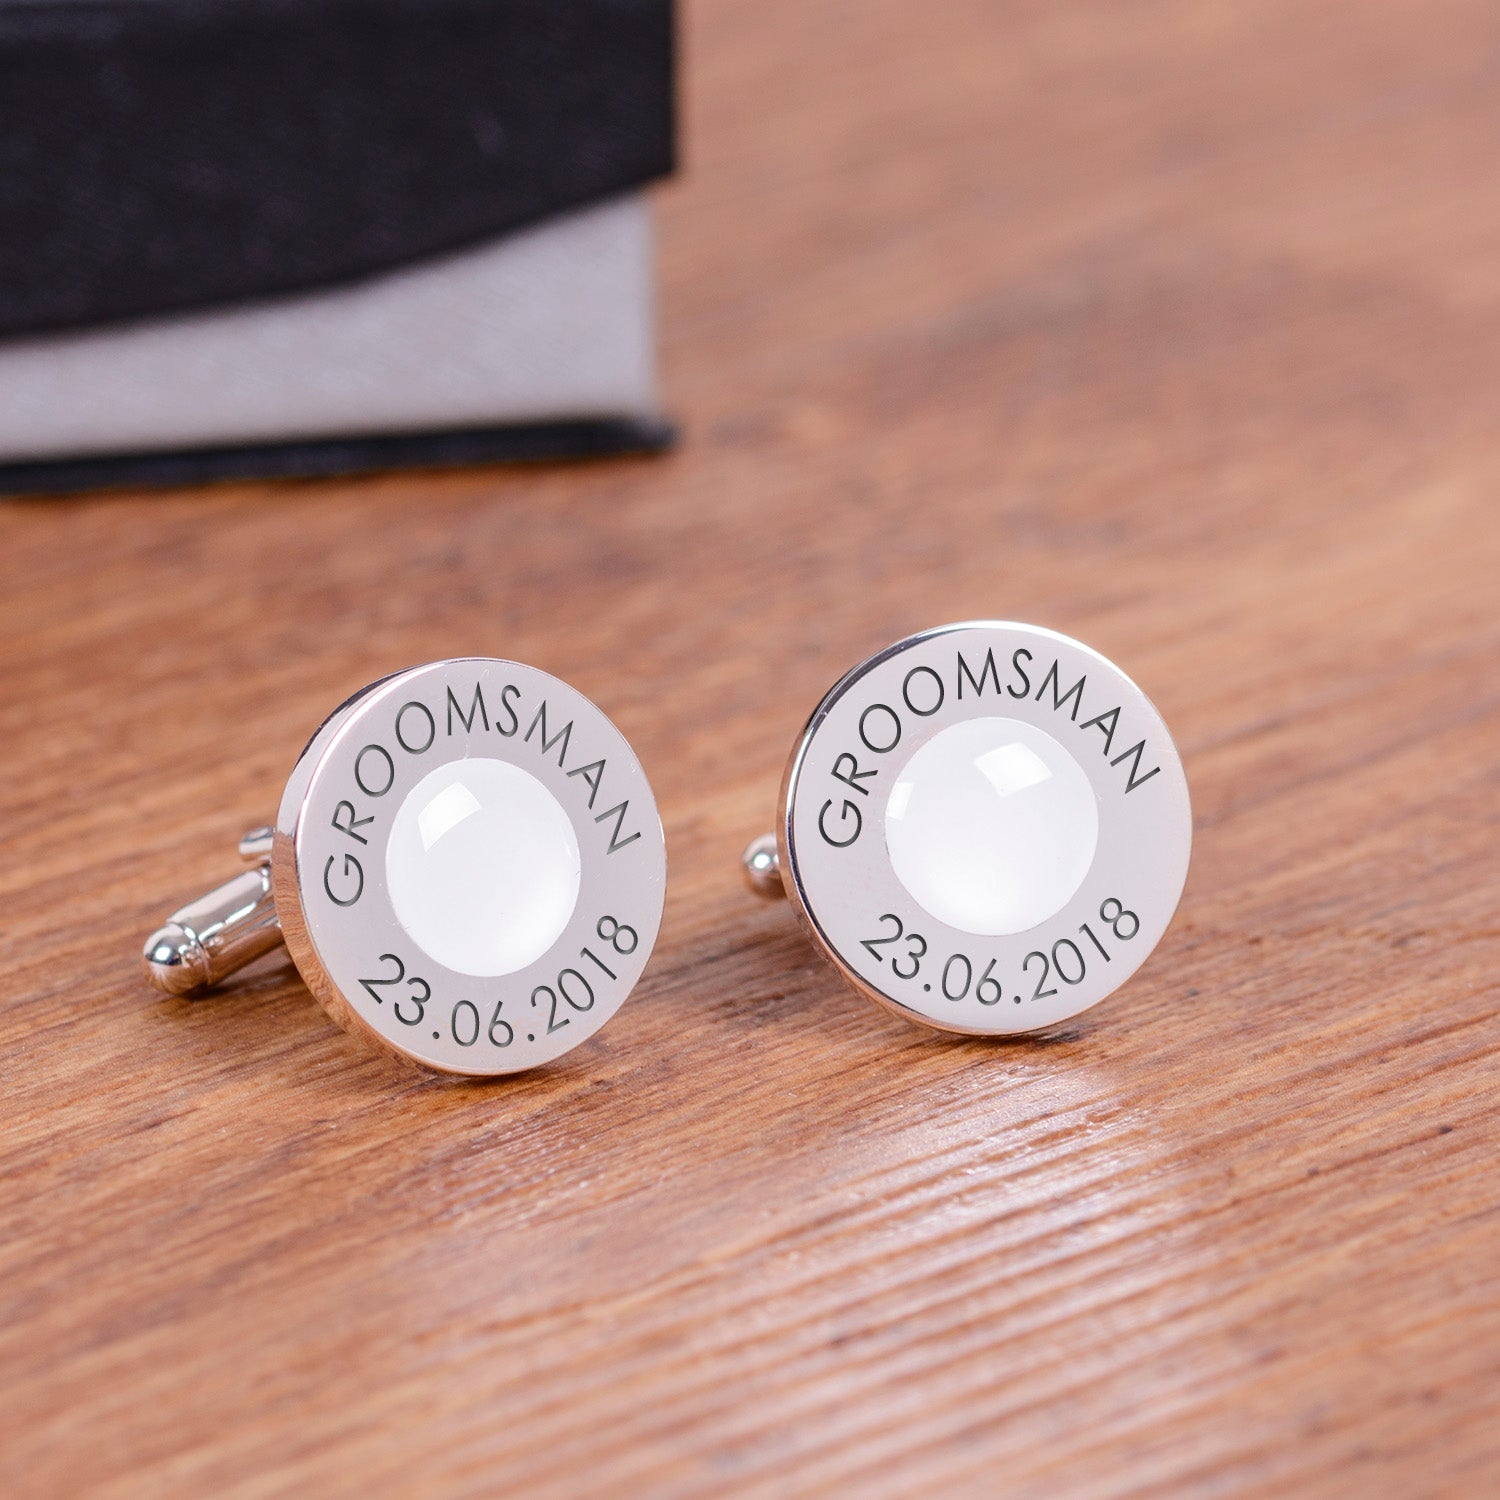 Personalised Wedding Party Cufflinks - Black Or White